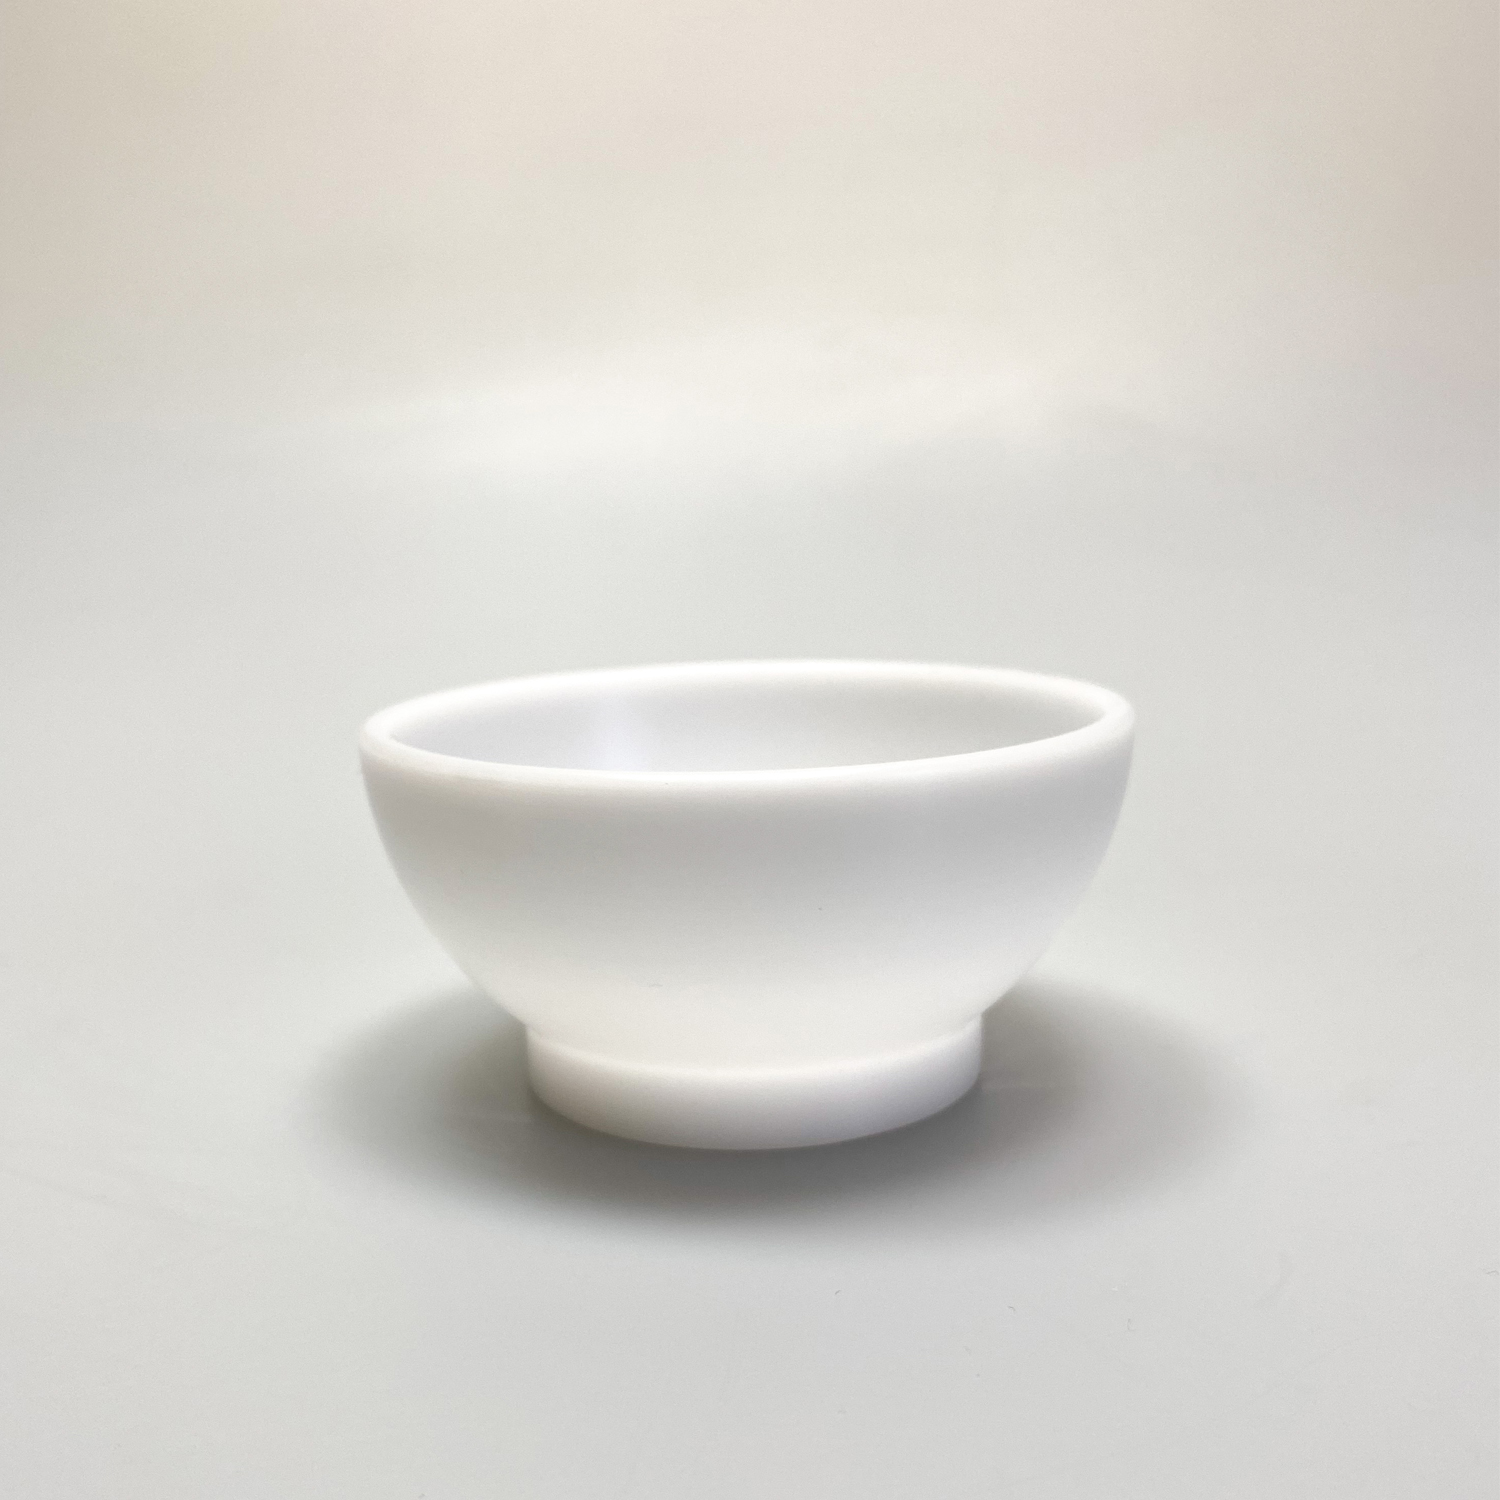 Bowl for spa and wellness treatments, Small, White